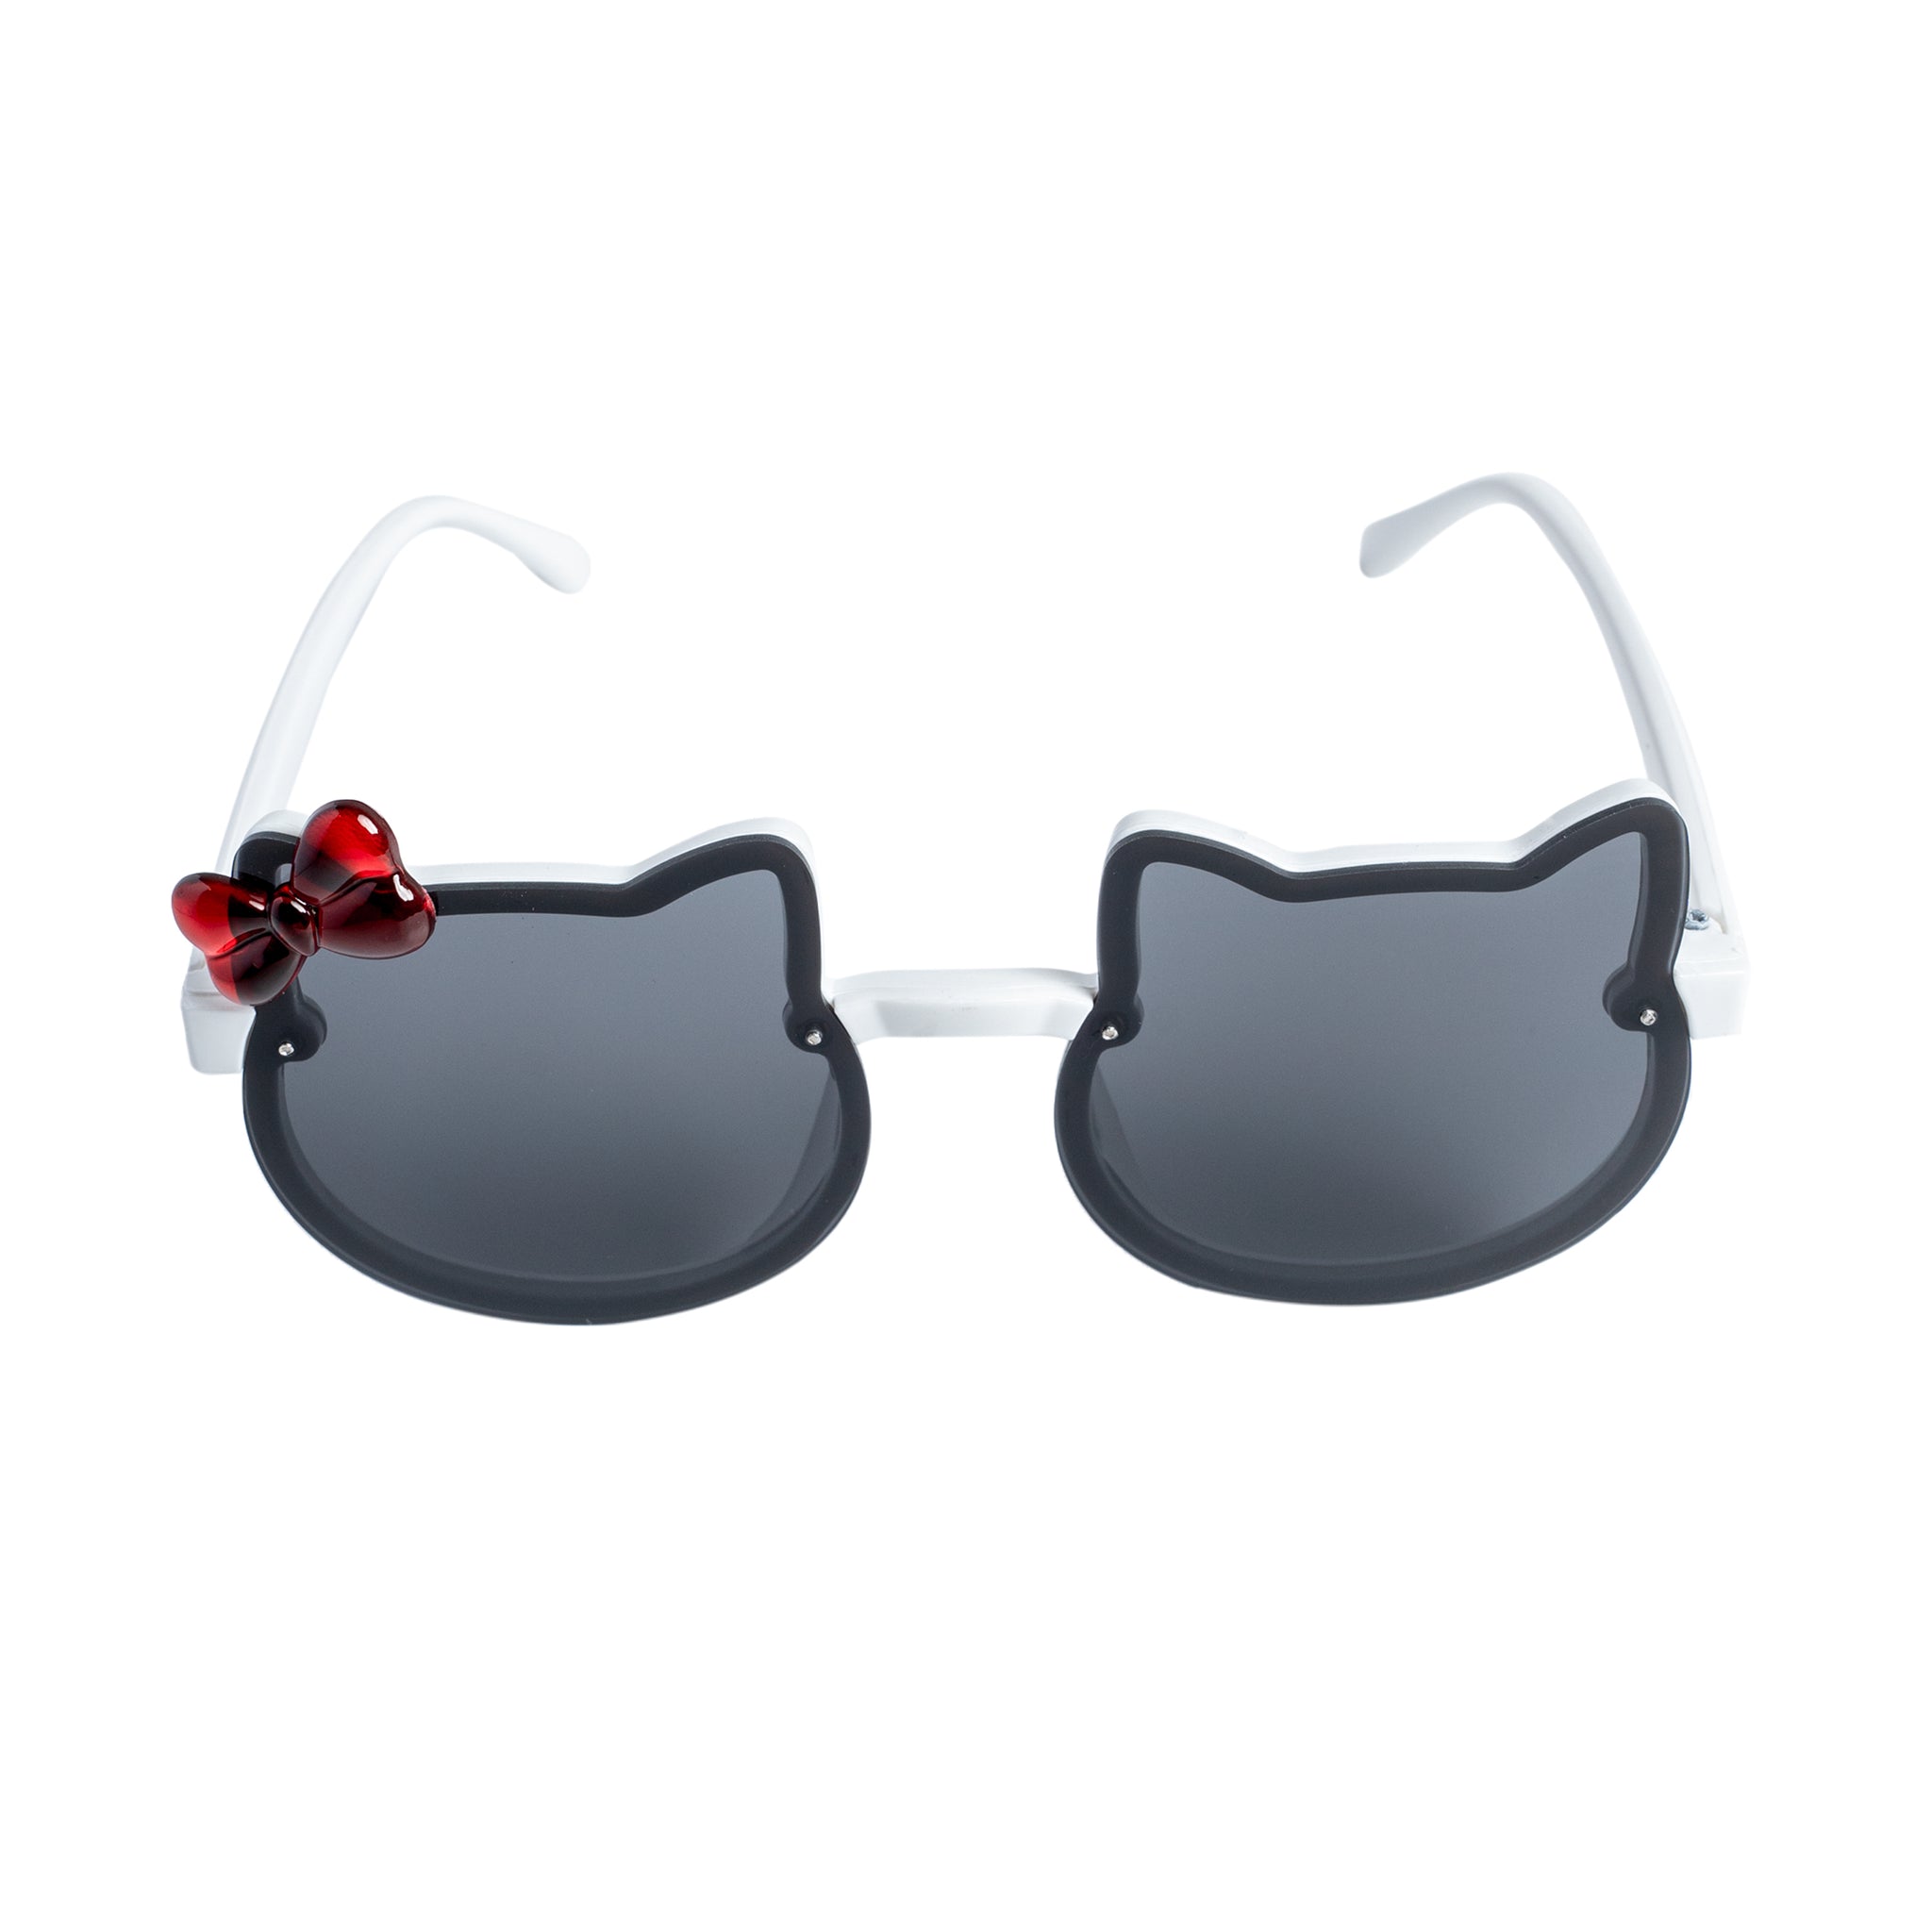 Chokore Kitty Sunglasses with Bow